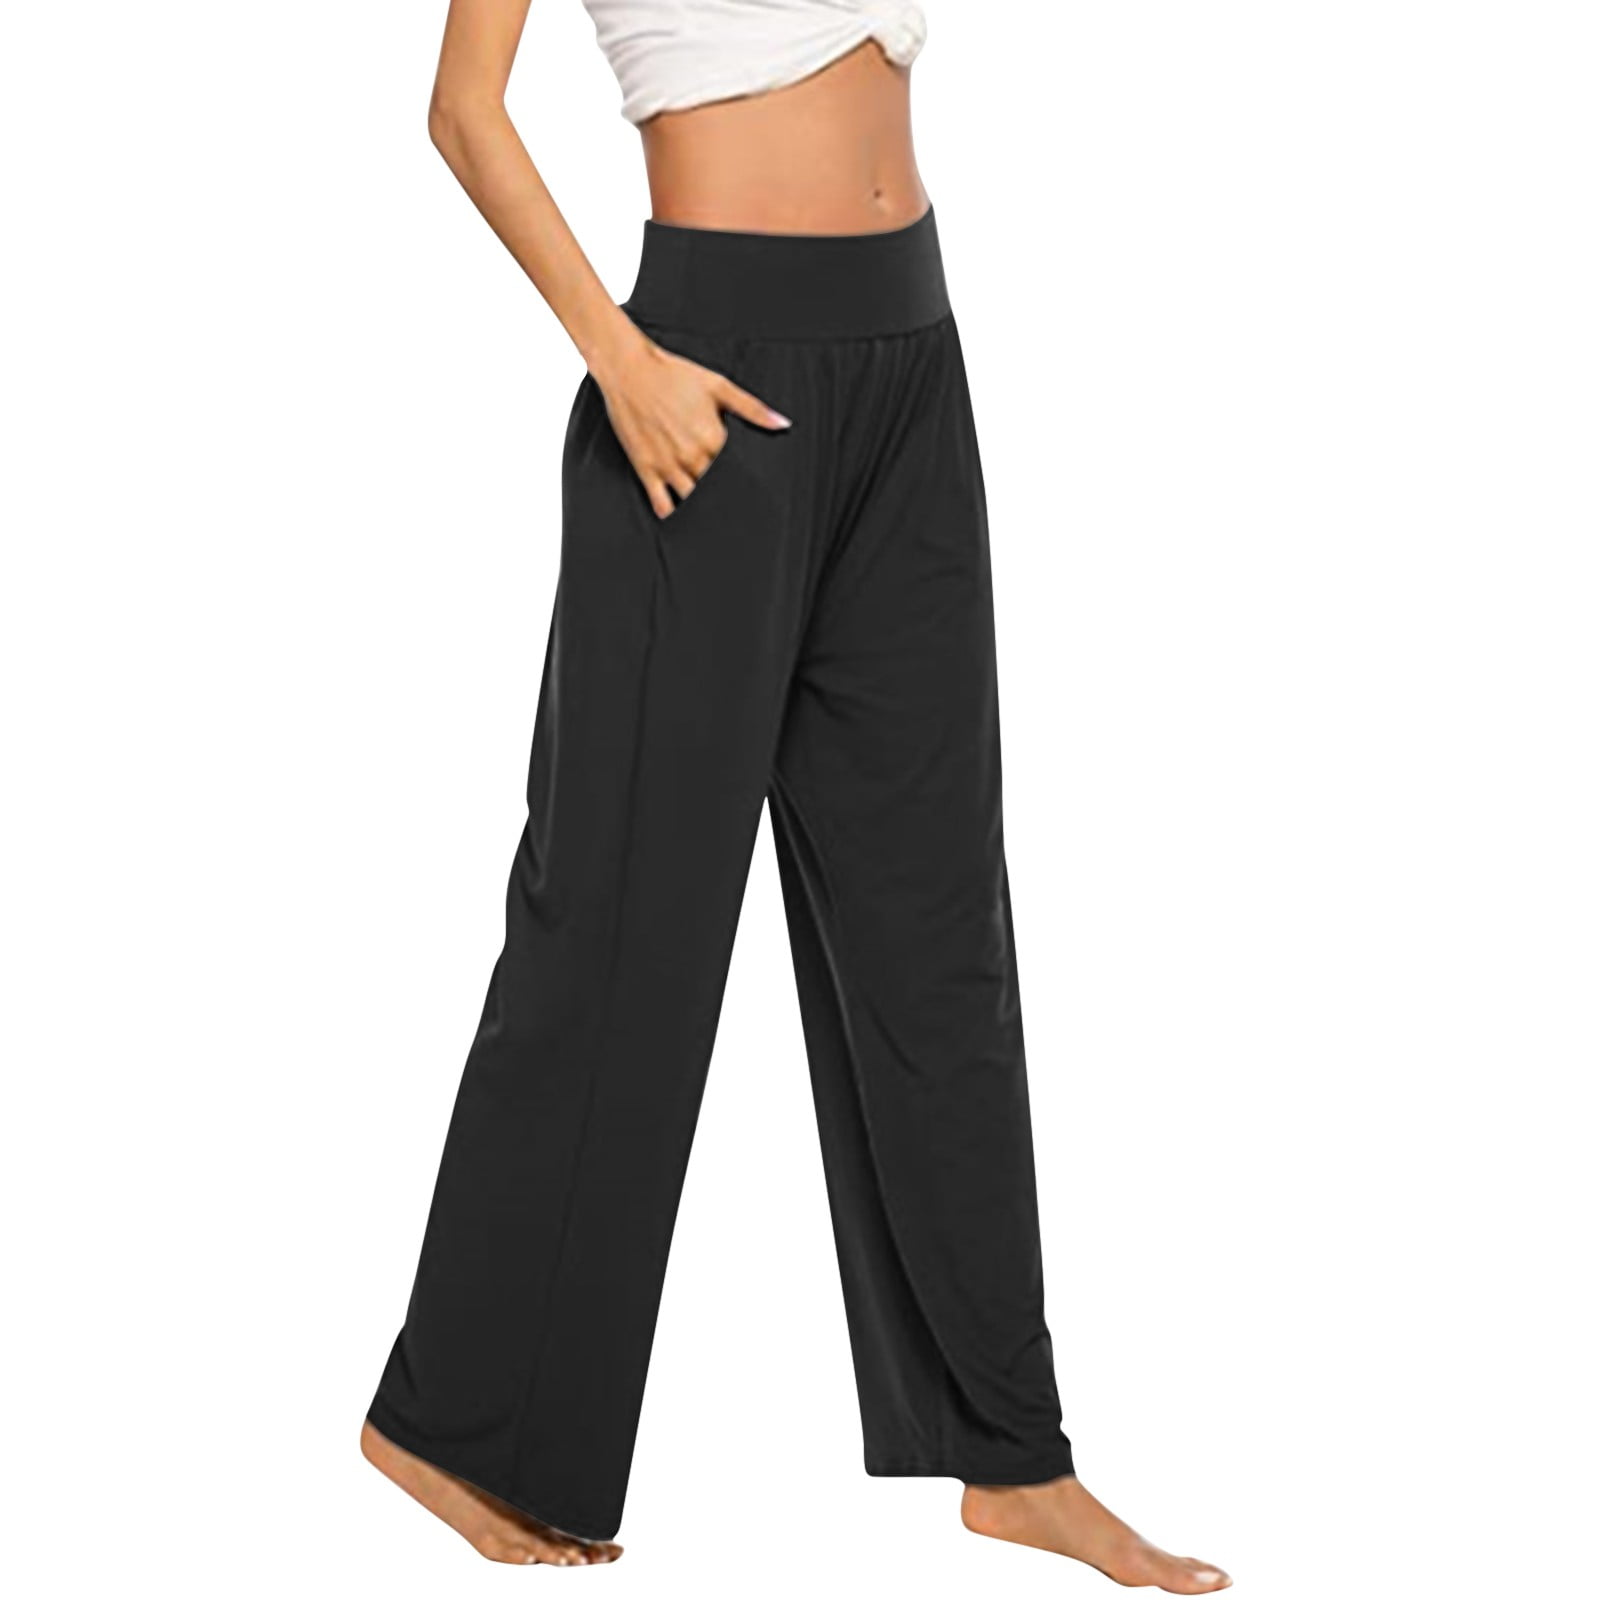 Haowind Joggers for Women with Pockets Elastic Waist Workout Sport Gym Pants  Comfy Lounge Yoga Running Pants Medium Black01